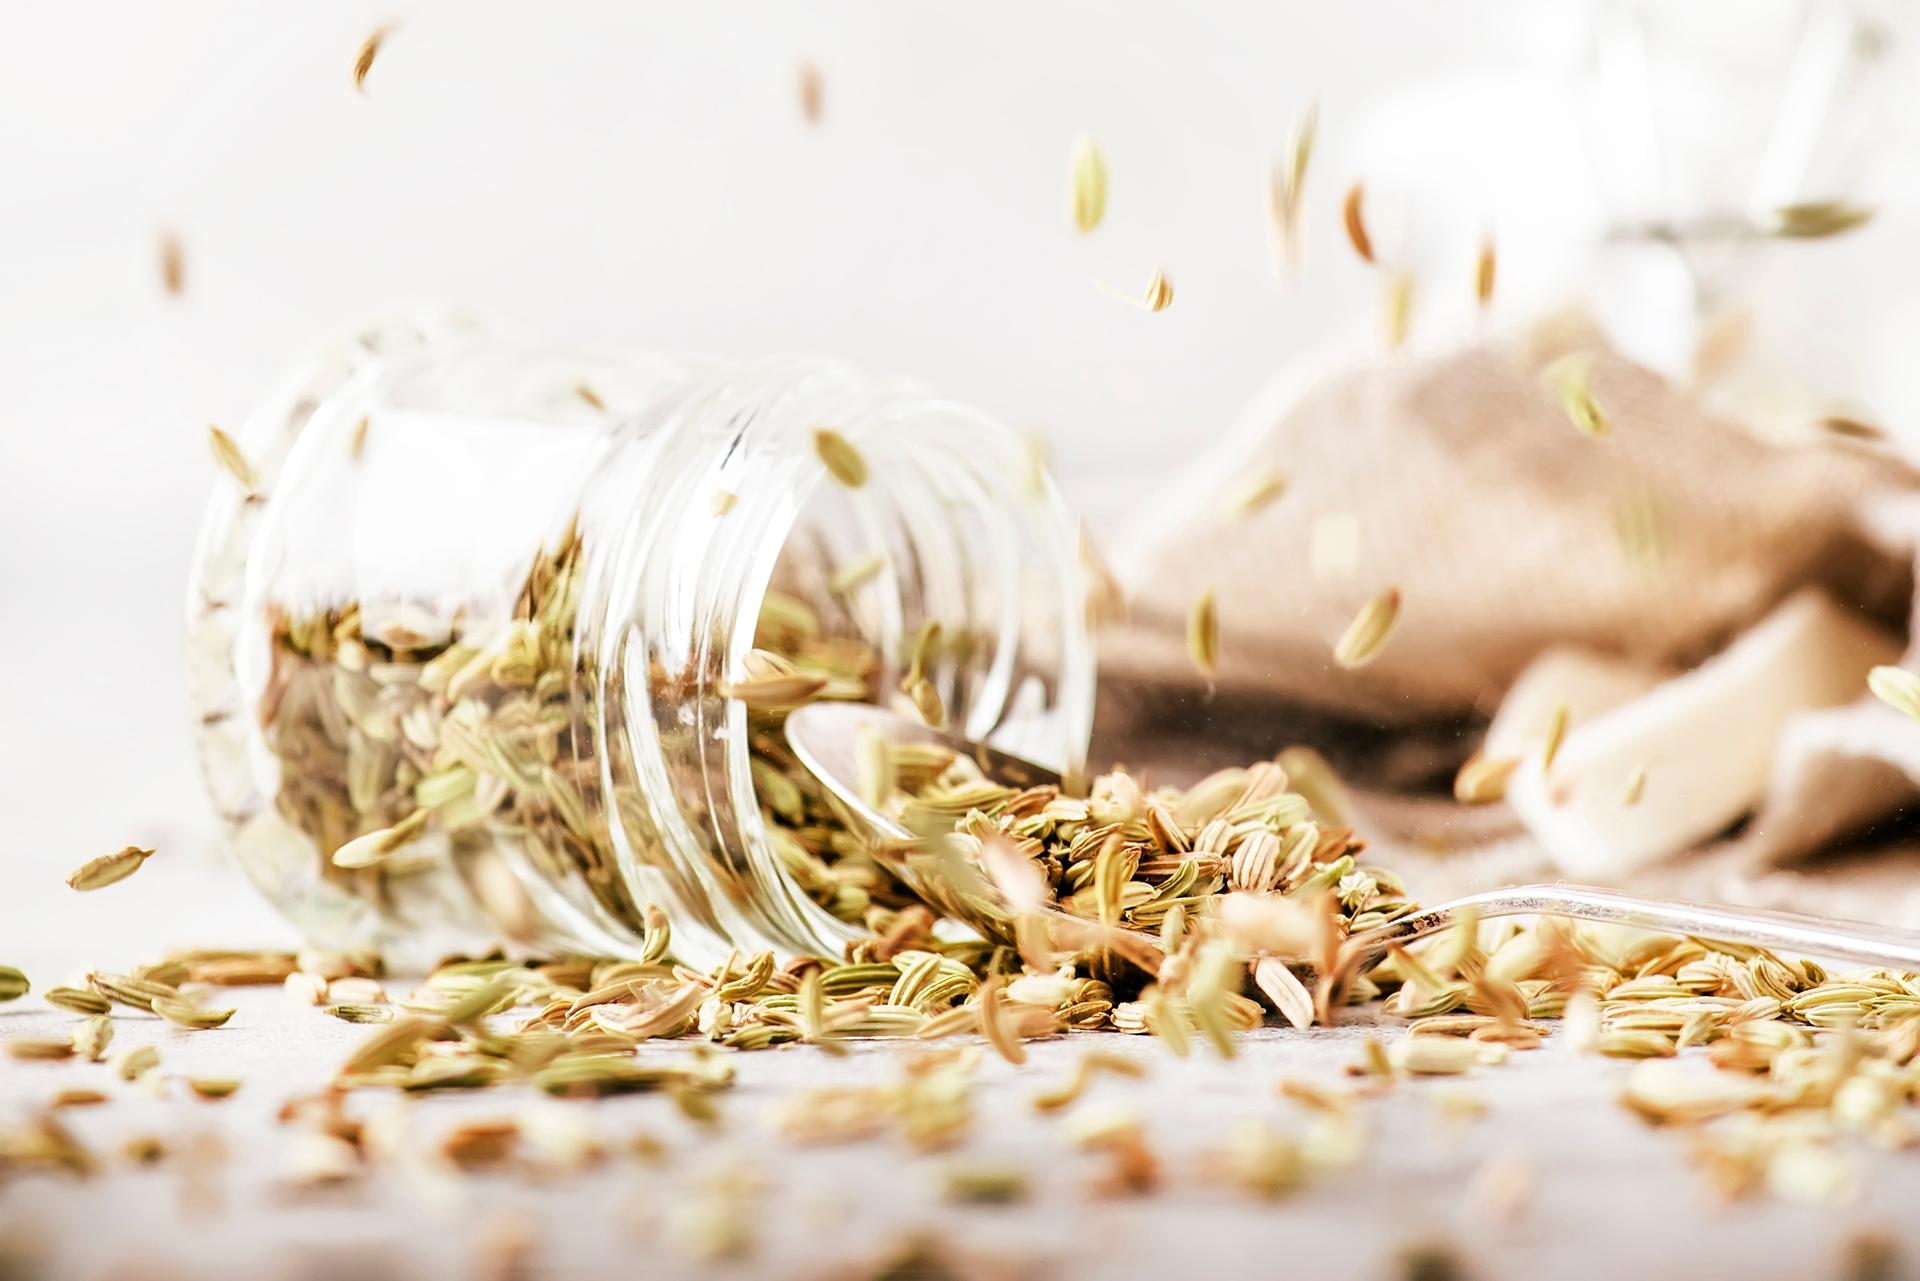 Fennel Seeds: Health Benefits, Vitamins, and Side Effects